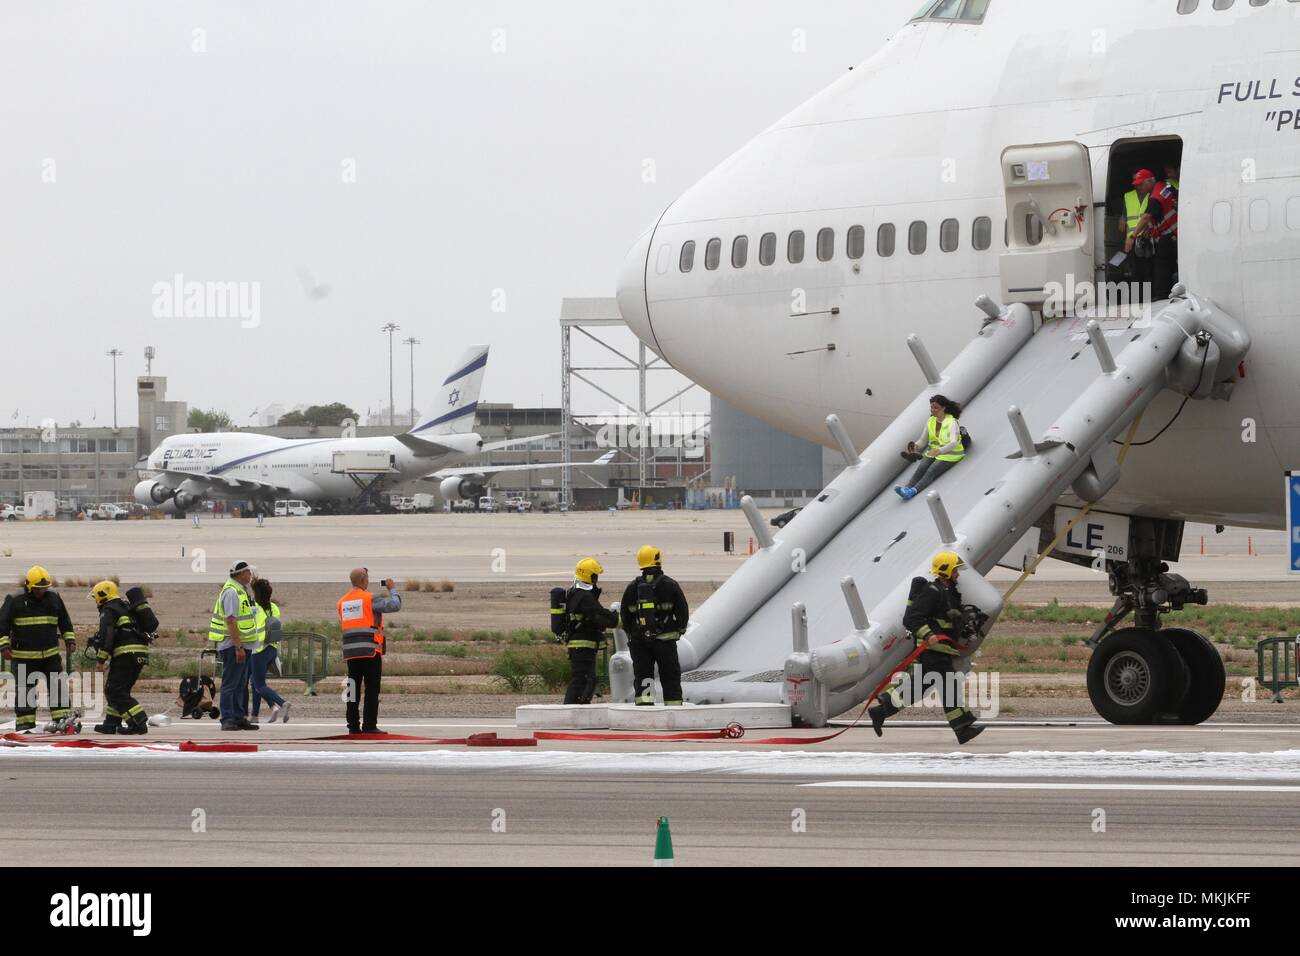 Tel Aviv, Israel. 8th May, 2018. People take part in the 'Pelican' emergency drill at Ben Gurion International Airport near Tel Aviv, Israel, on May 8, 2018. Ben Gurion International Airport carried out on Tuesday a large scale emergency drill simulating an emergency landing by a Boeing 747-400 jumbo jet carrying hundreds of passengers. Around 1,000 representatives of the airport, the defense and health ministries, the air force, police, emergency services and the IDF Home Front Command took part in the drill. Credit: Gil Cohen Magen/Xinhua/Alamy Live News Stock Photo